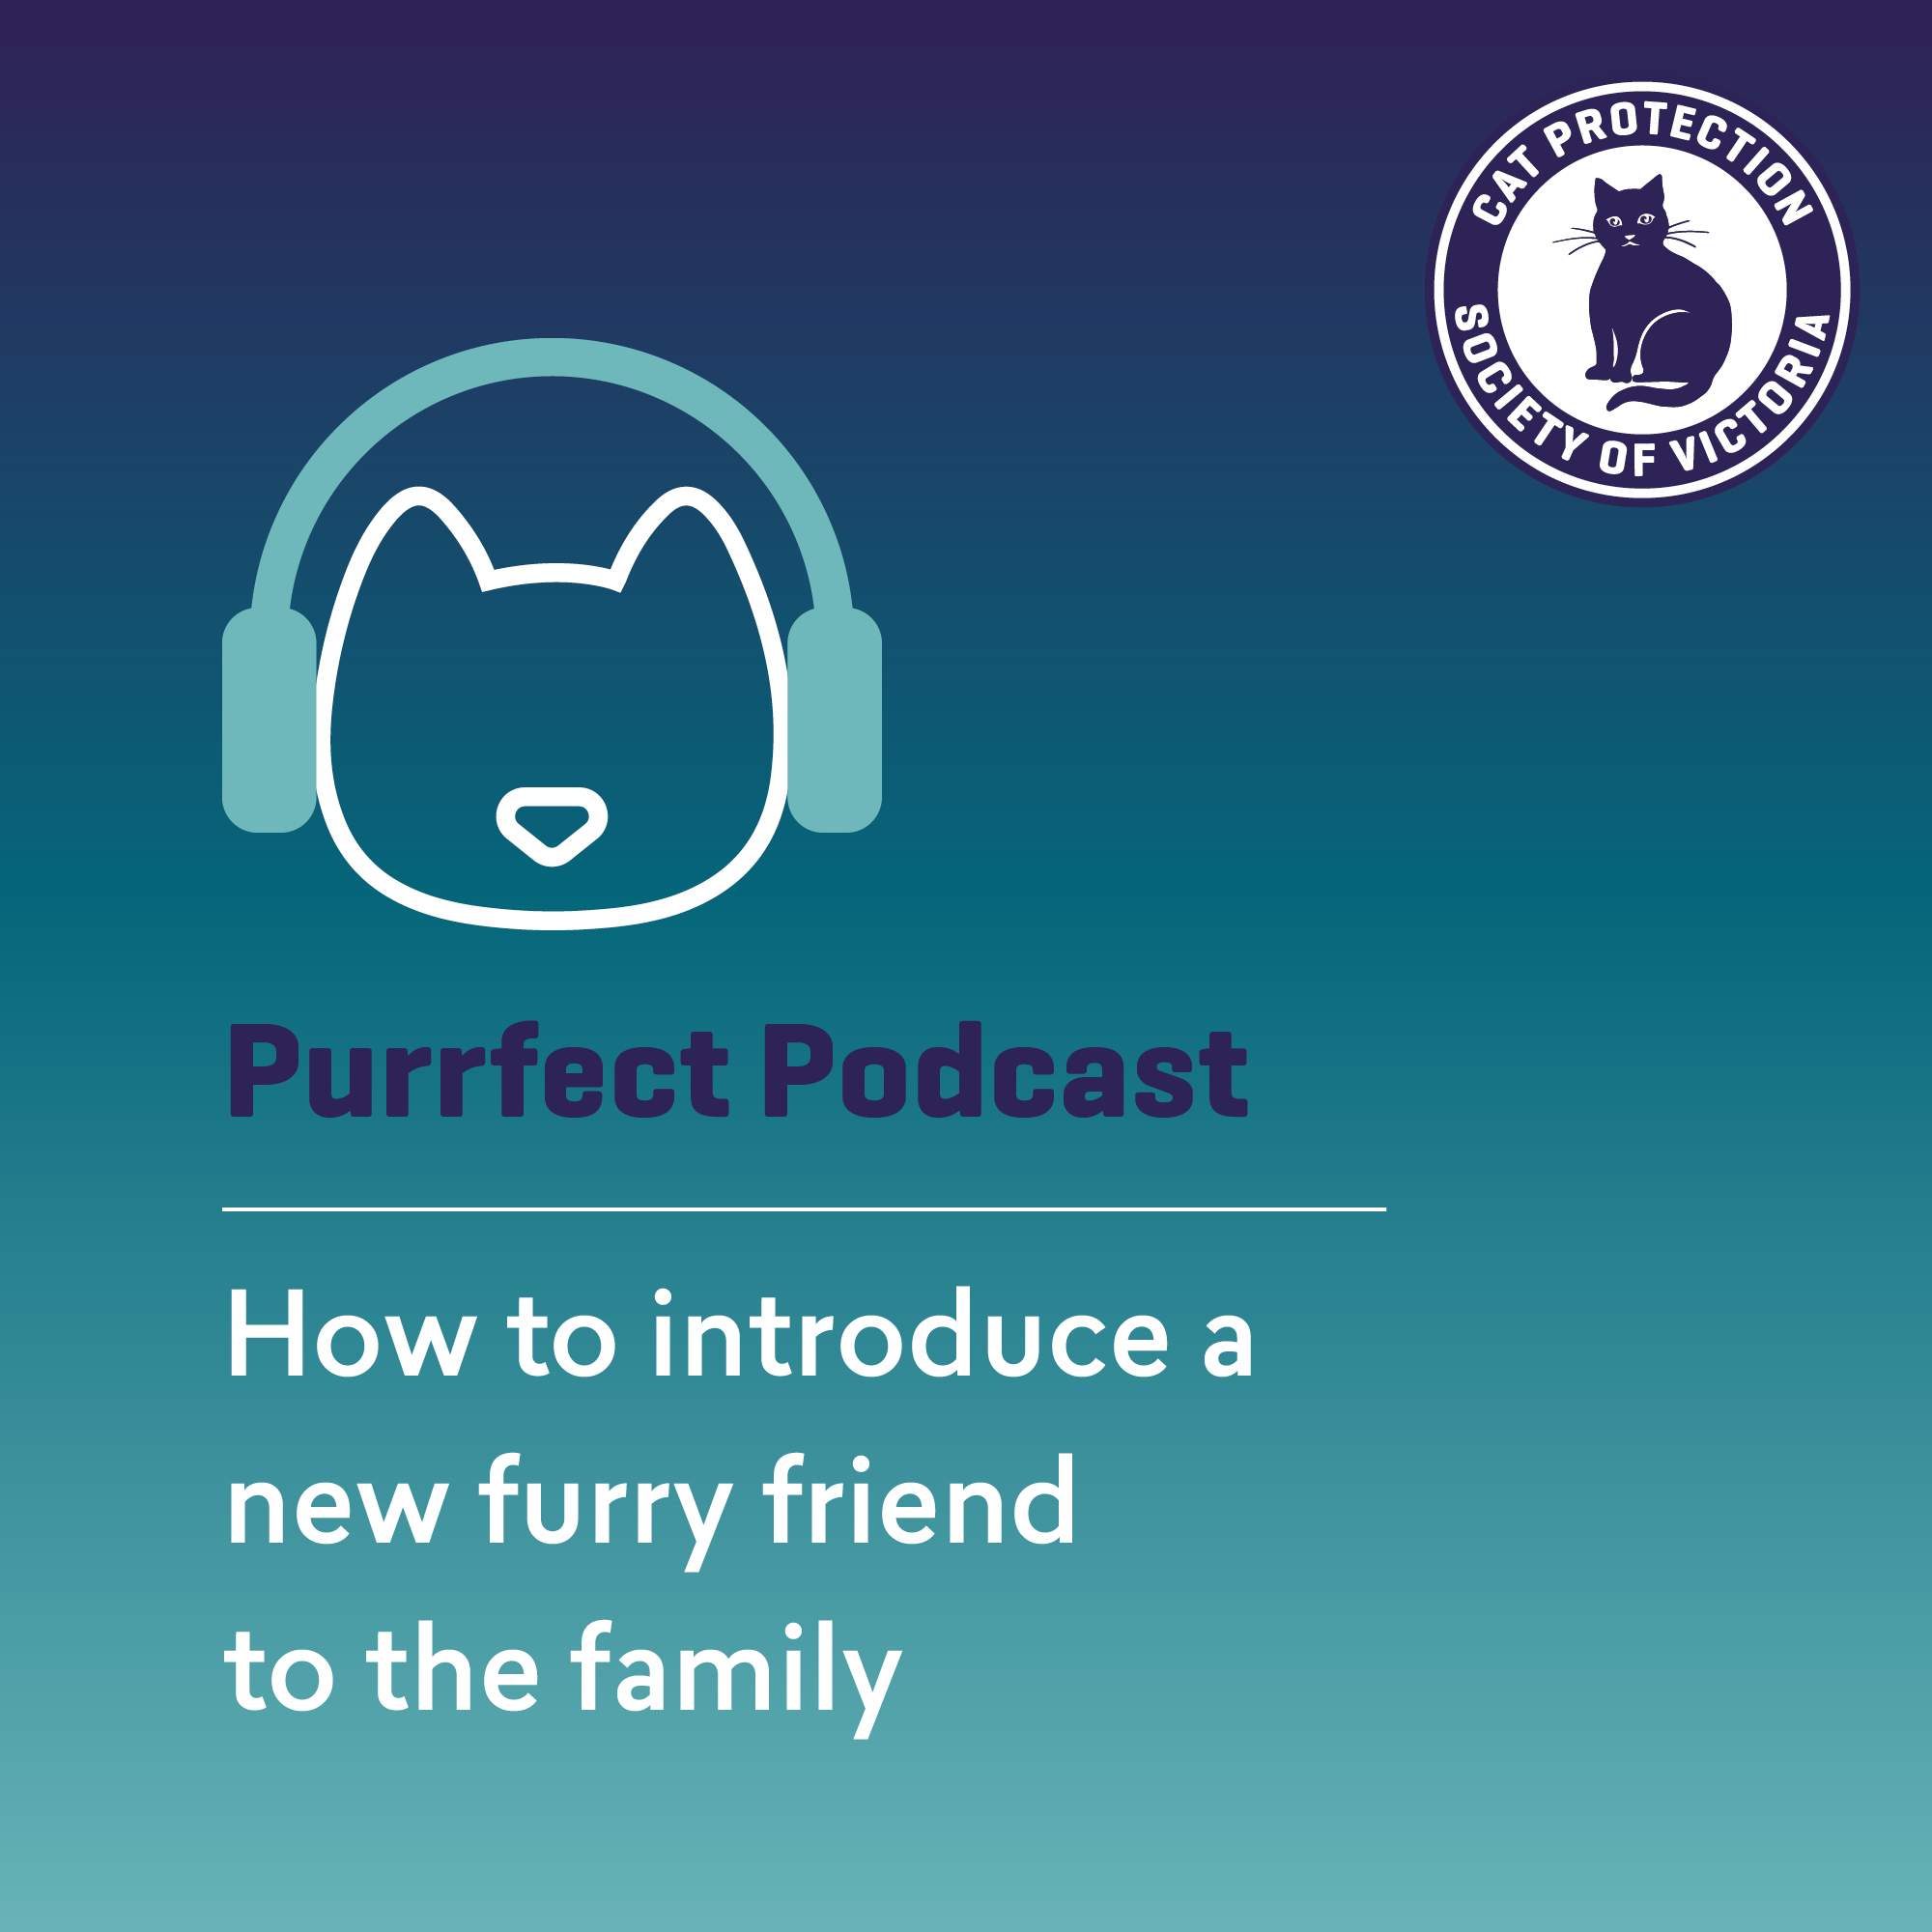 How to introduce a new furry friend to the family